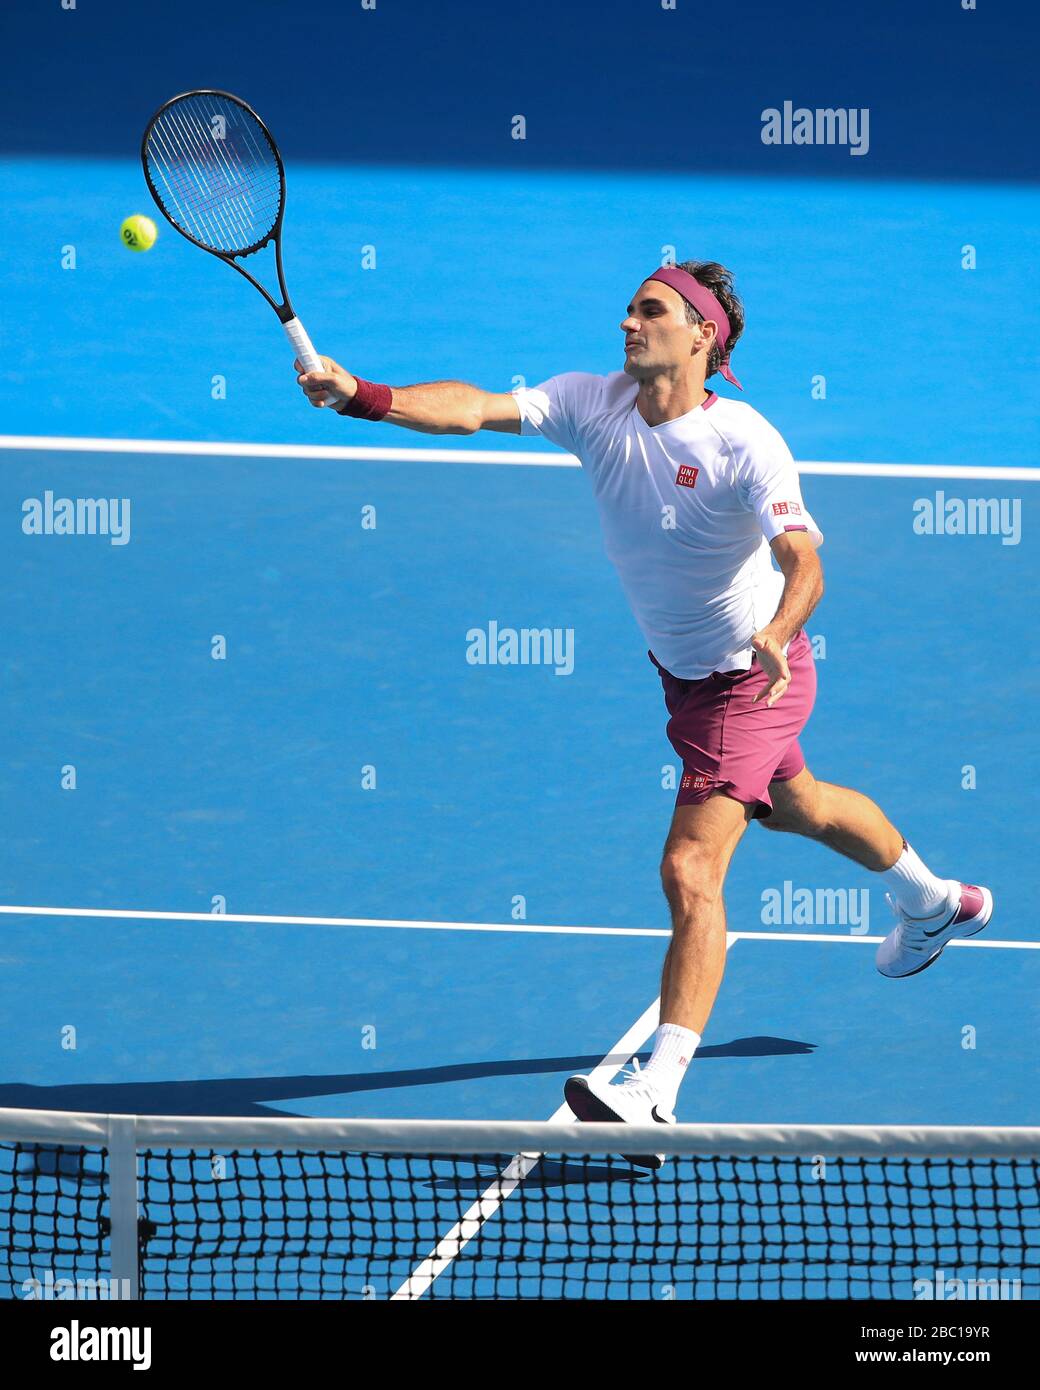 Swiss tennis player Roger Federer (SUI) playing forehand volley shot , Australian Open 2020 tennis tournament, Melbourne Park, Melbourne, Victoria, Au Stock Photo